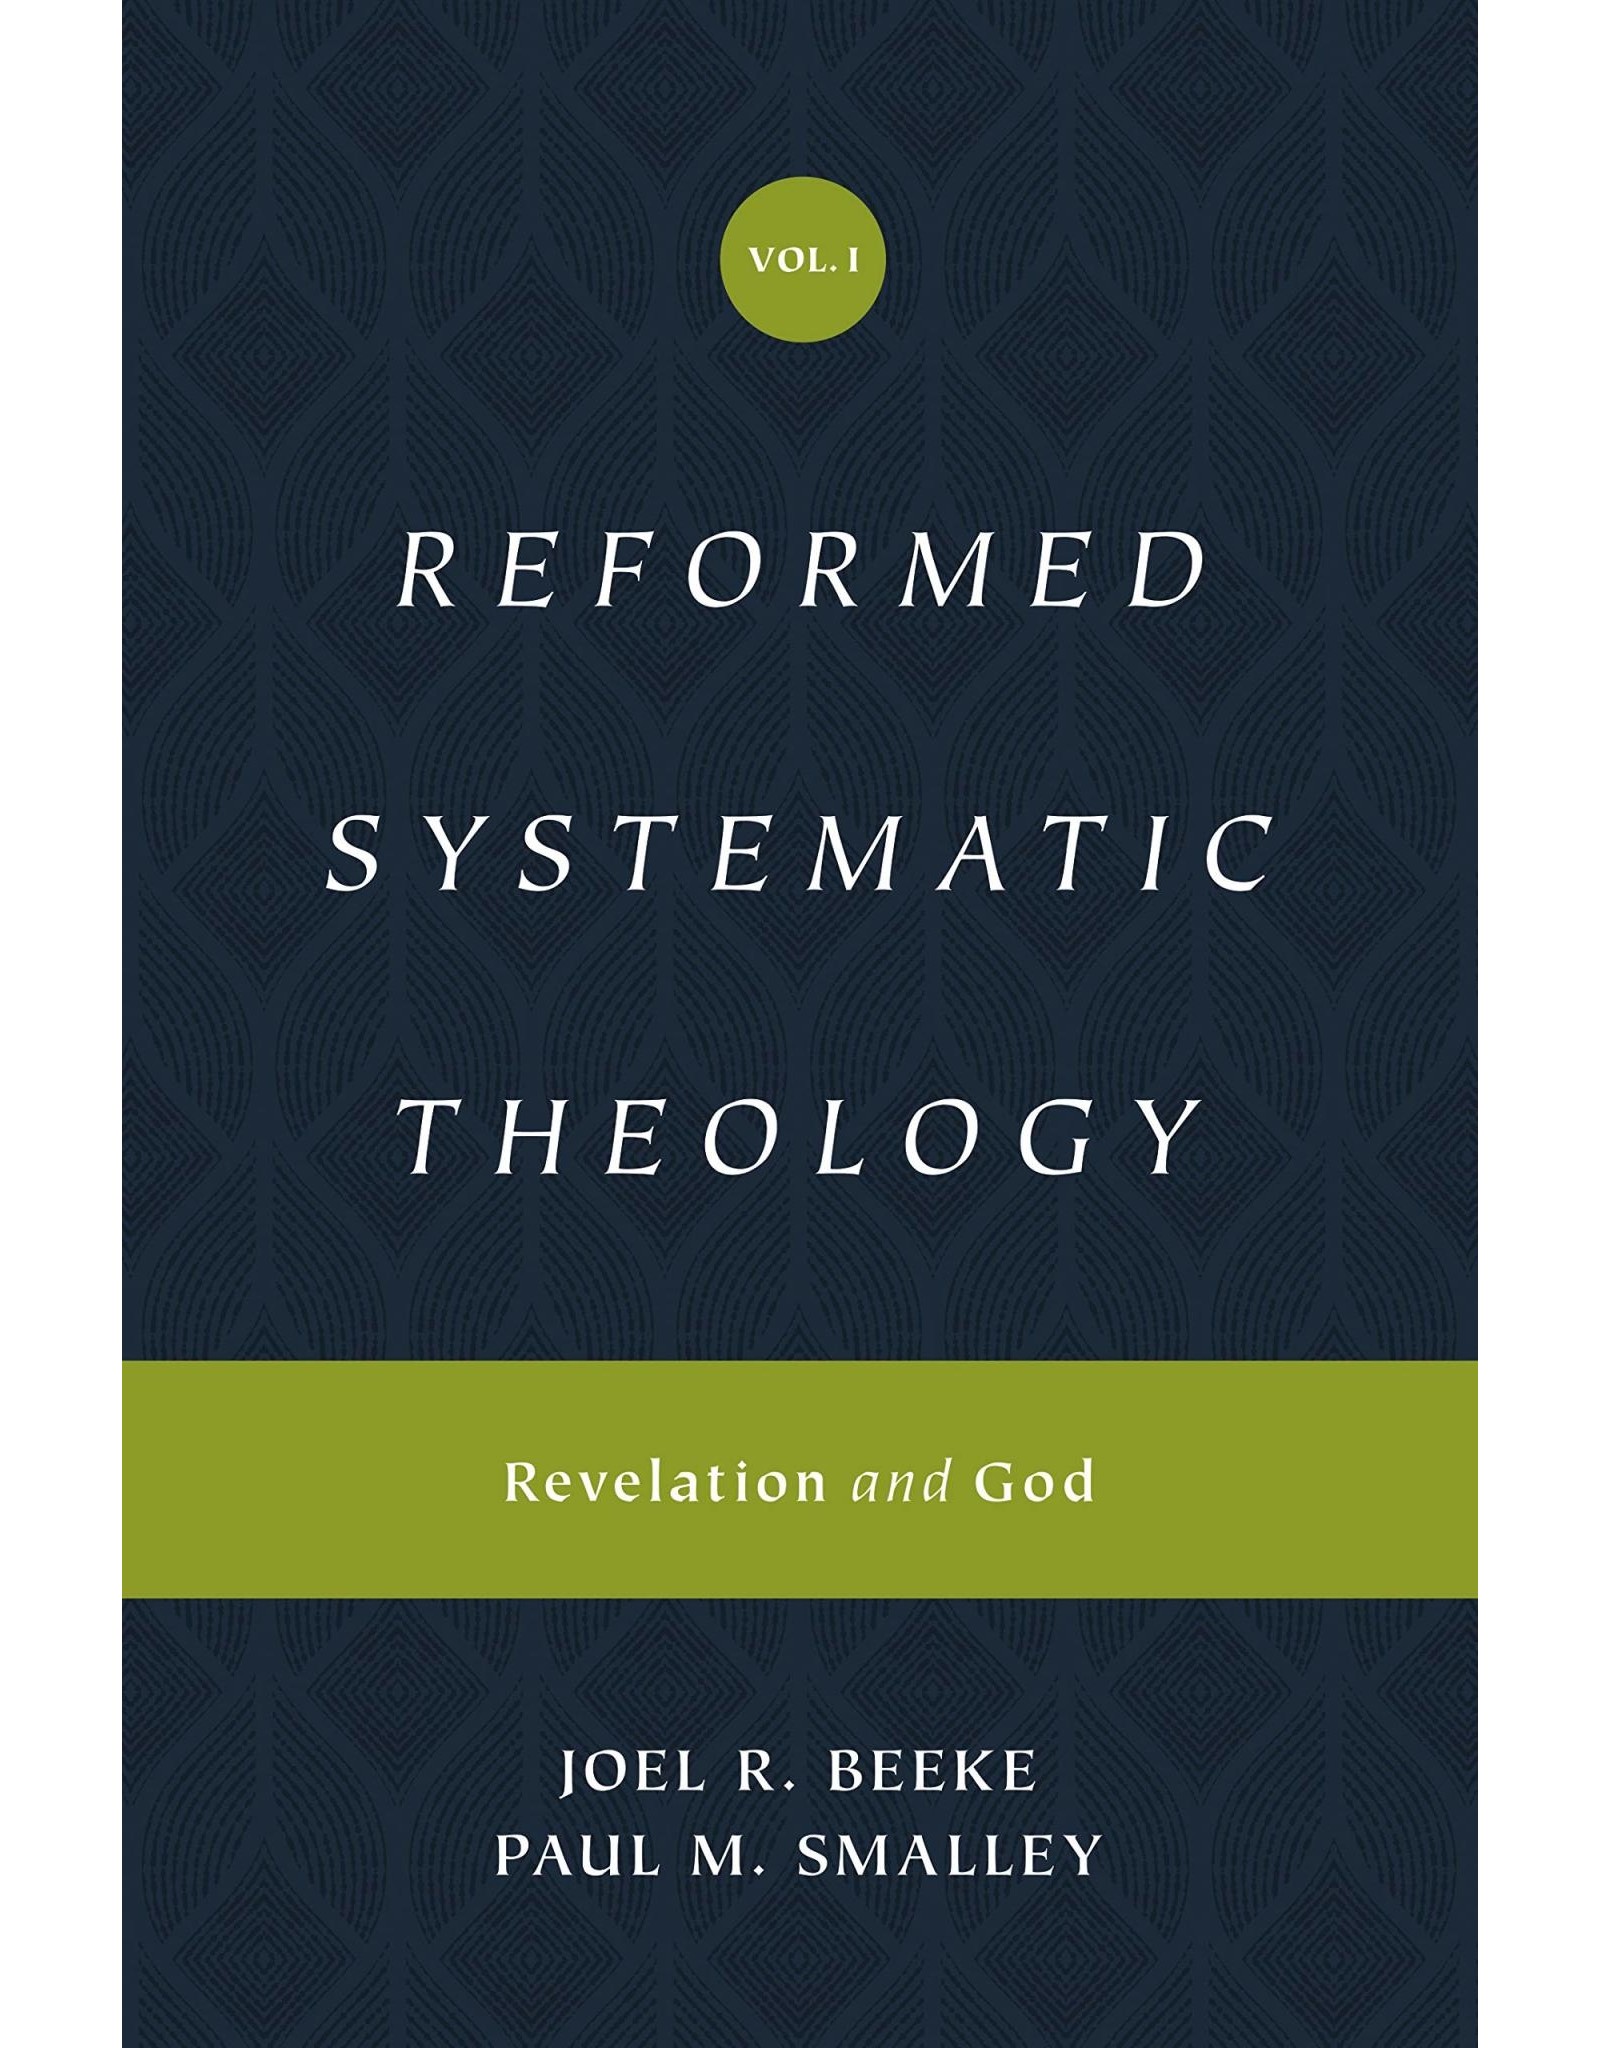 Reformed Theological Seminary books - All books by Reformed